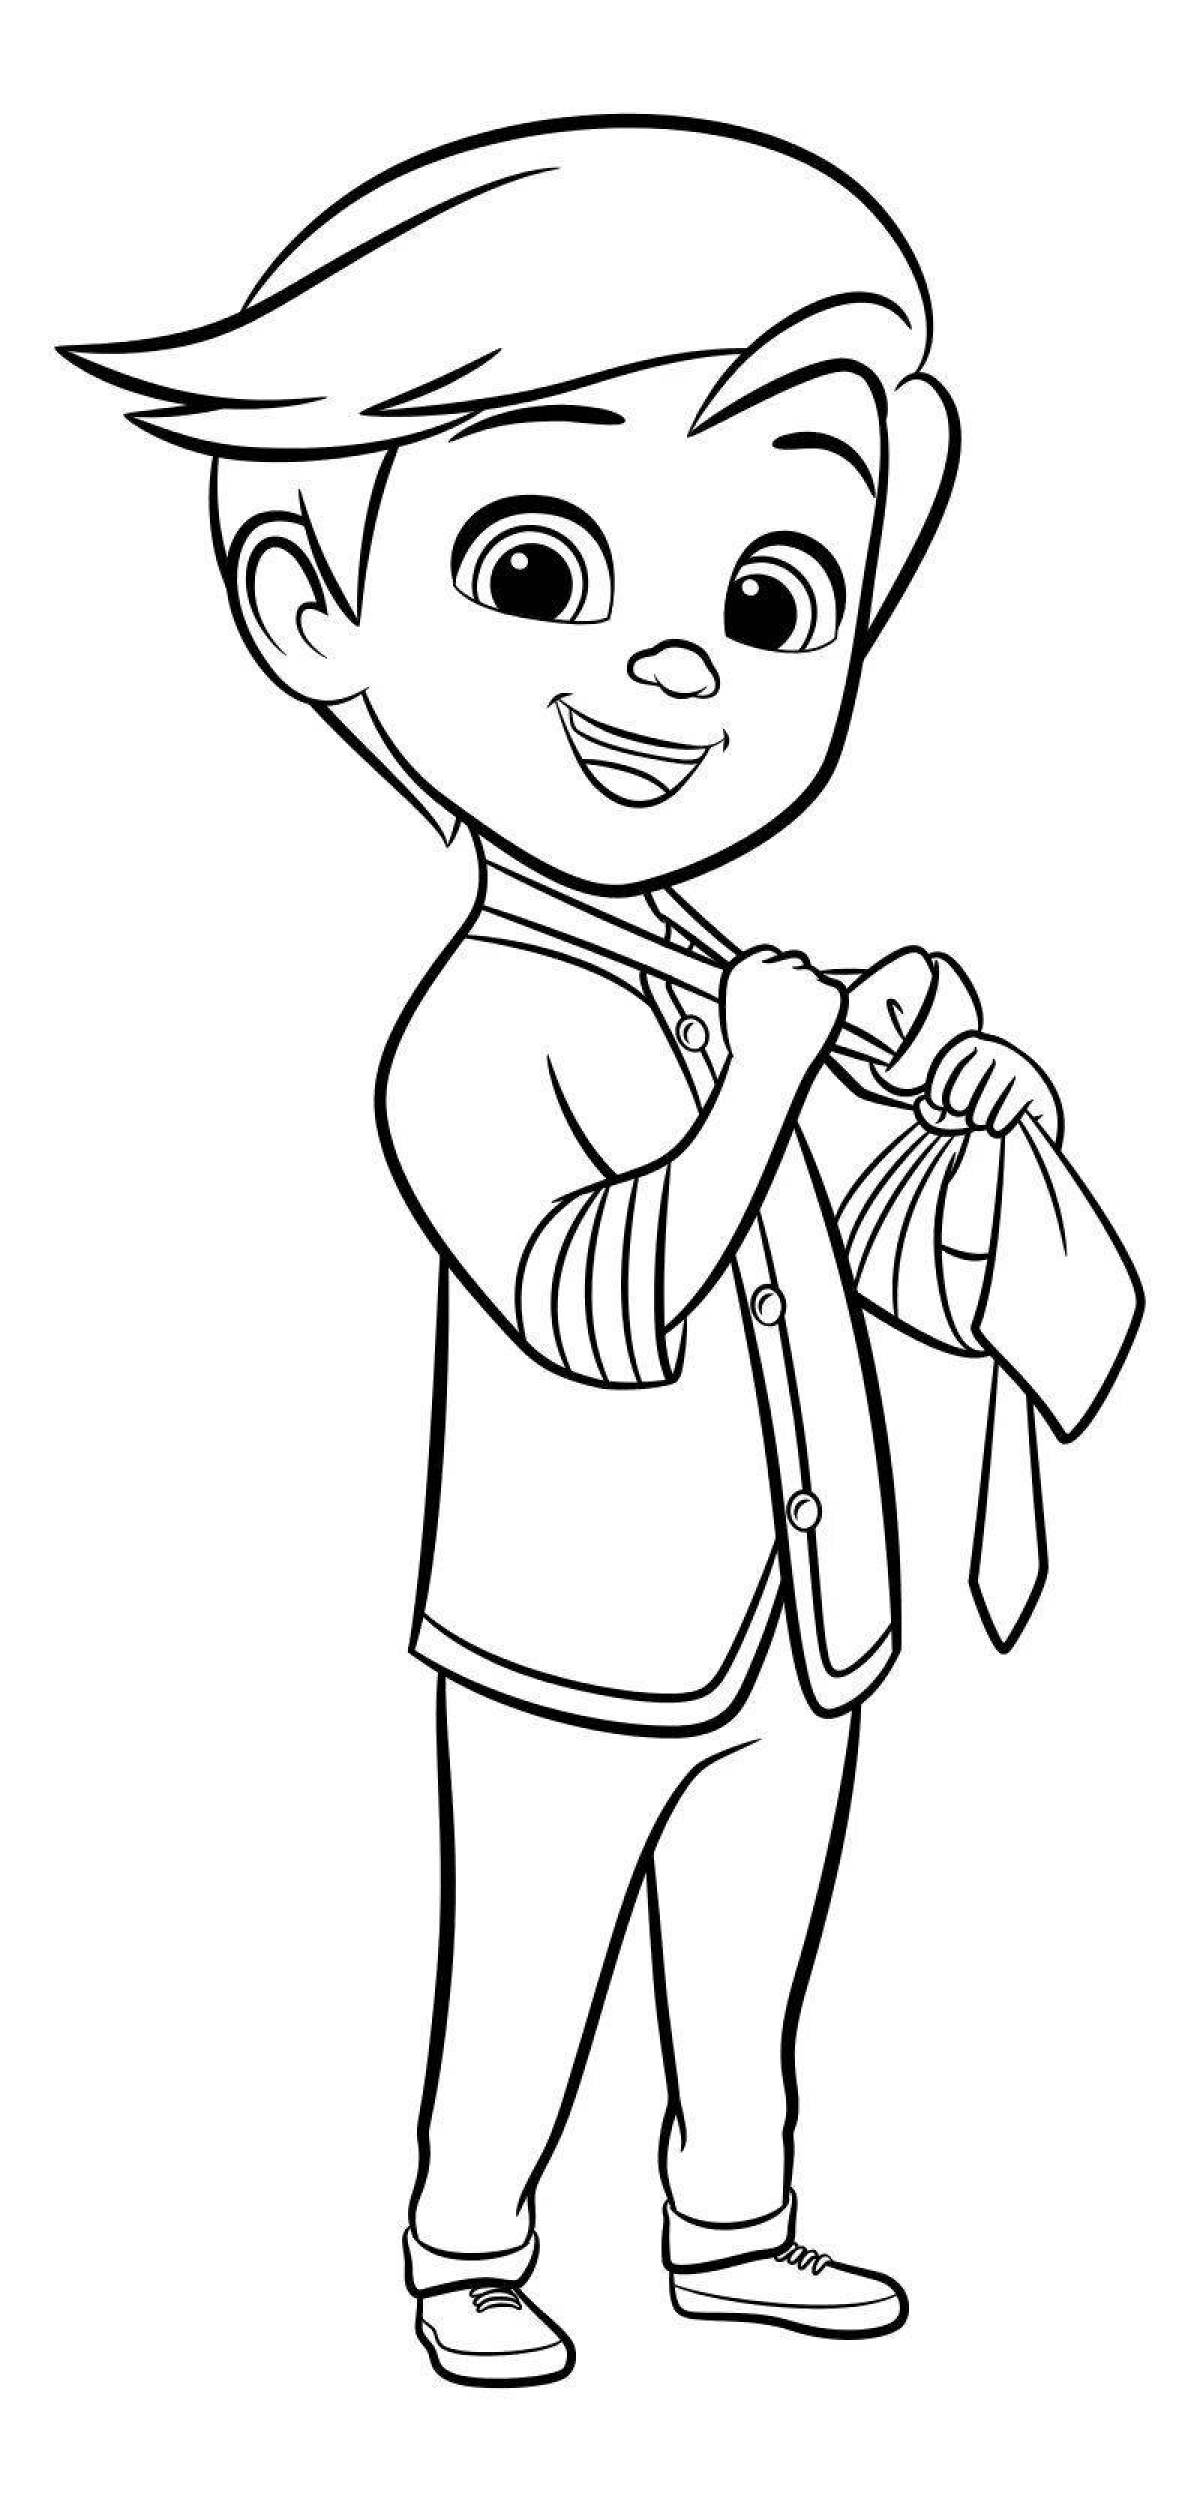 Fun coloring page boss baby figure